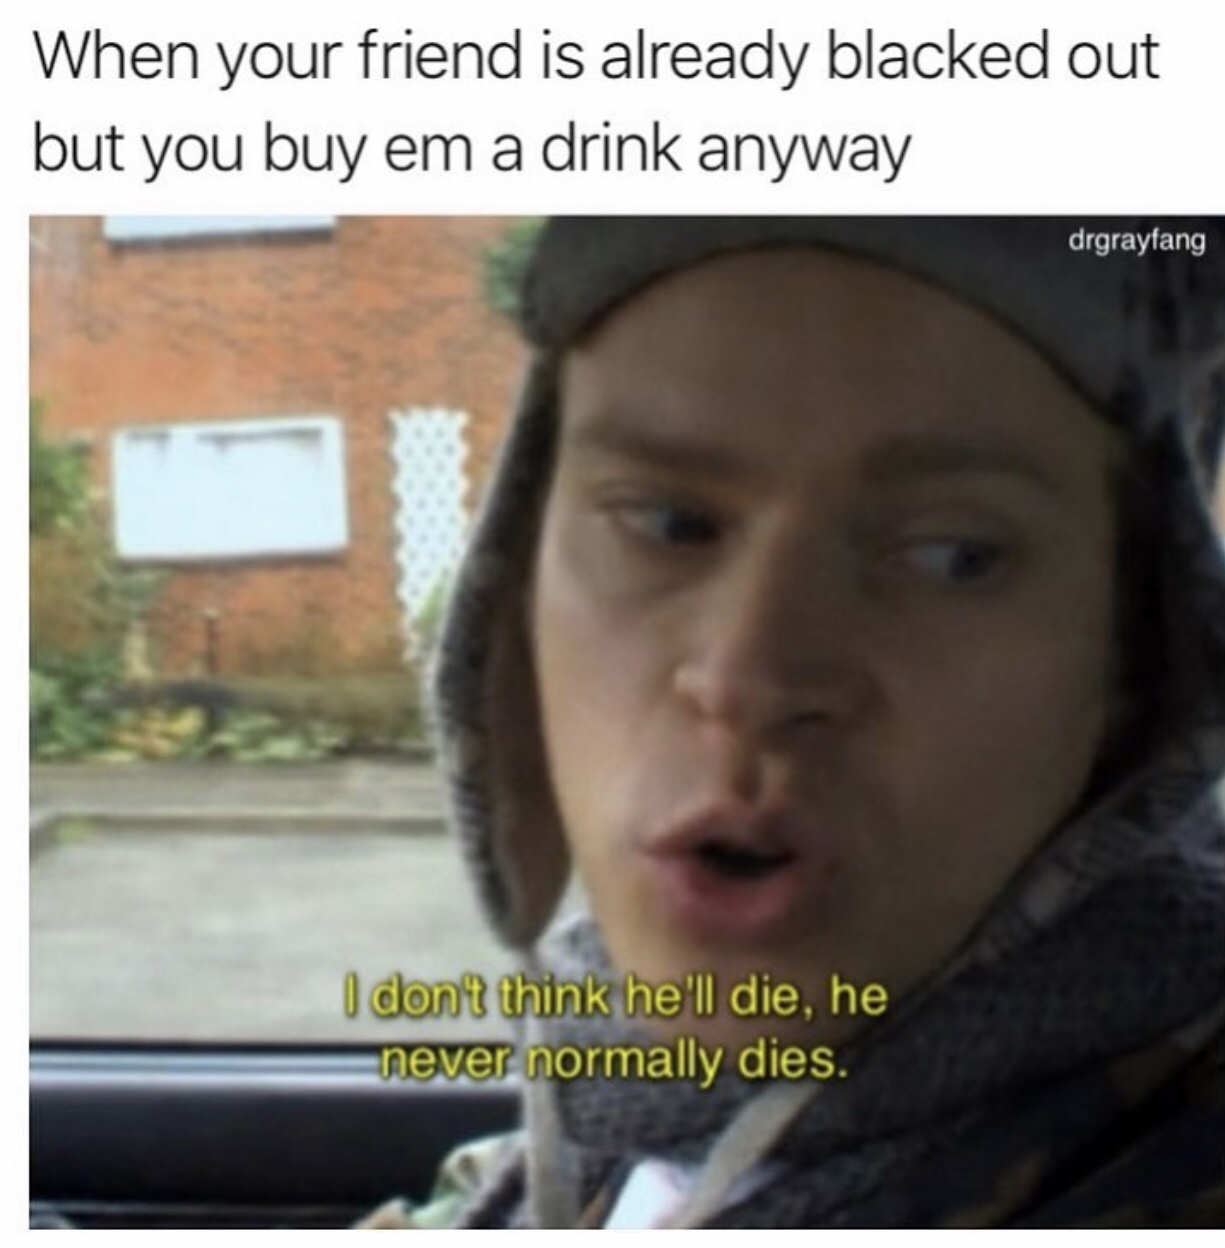 uber memes - When your friend is already blacked out but you buy em a drink anyway drgrayfang I don't think he'll die, he never normally dies.